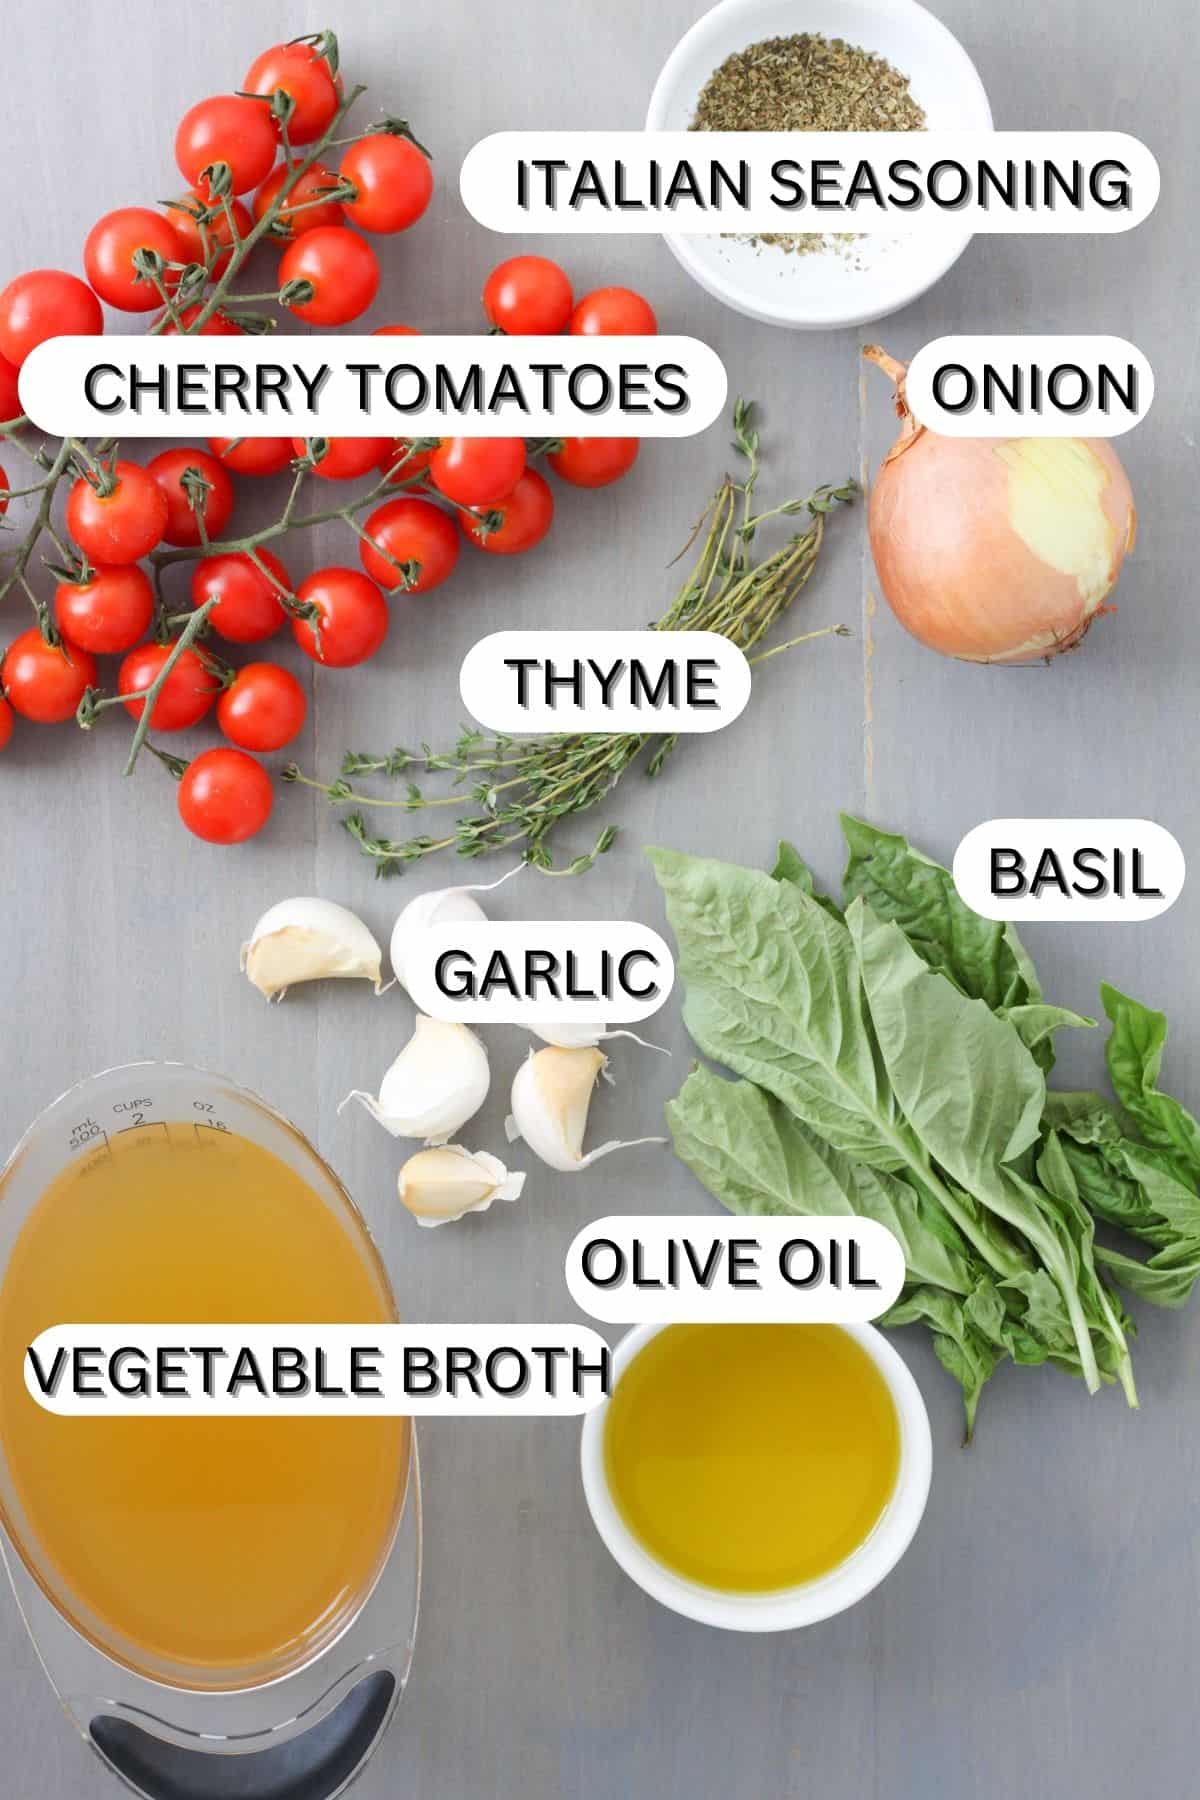 Ingredients for cherry tomato soup on a table.